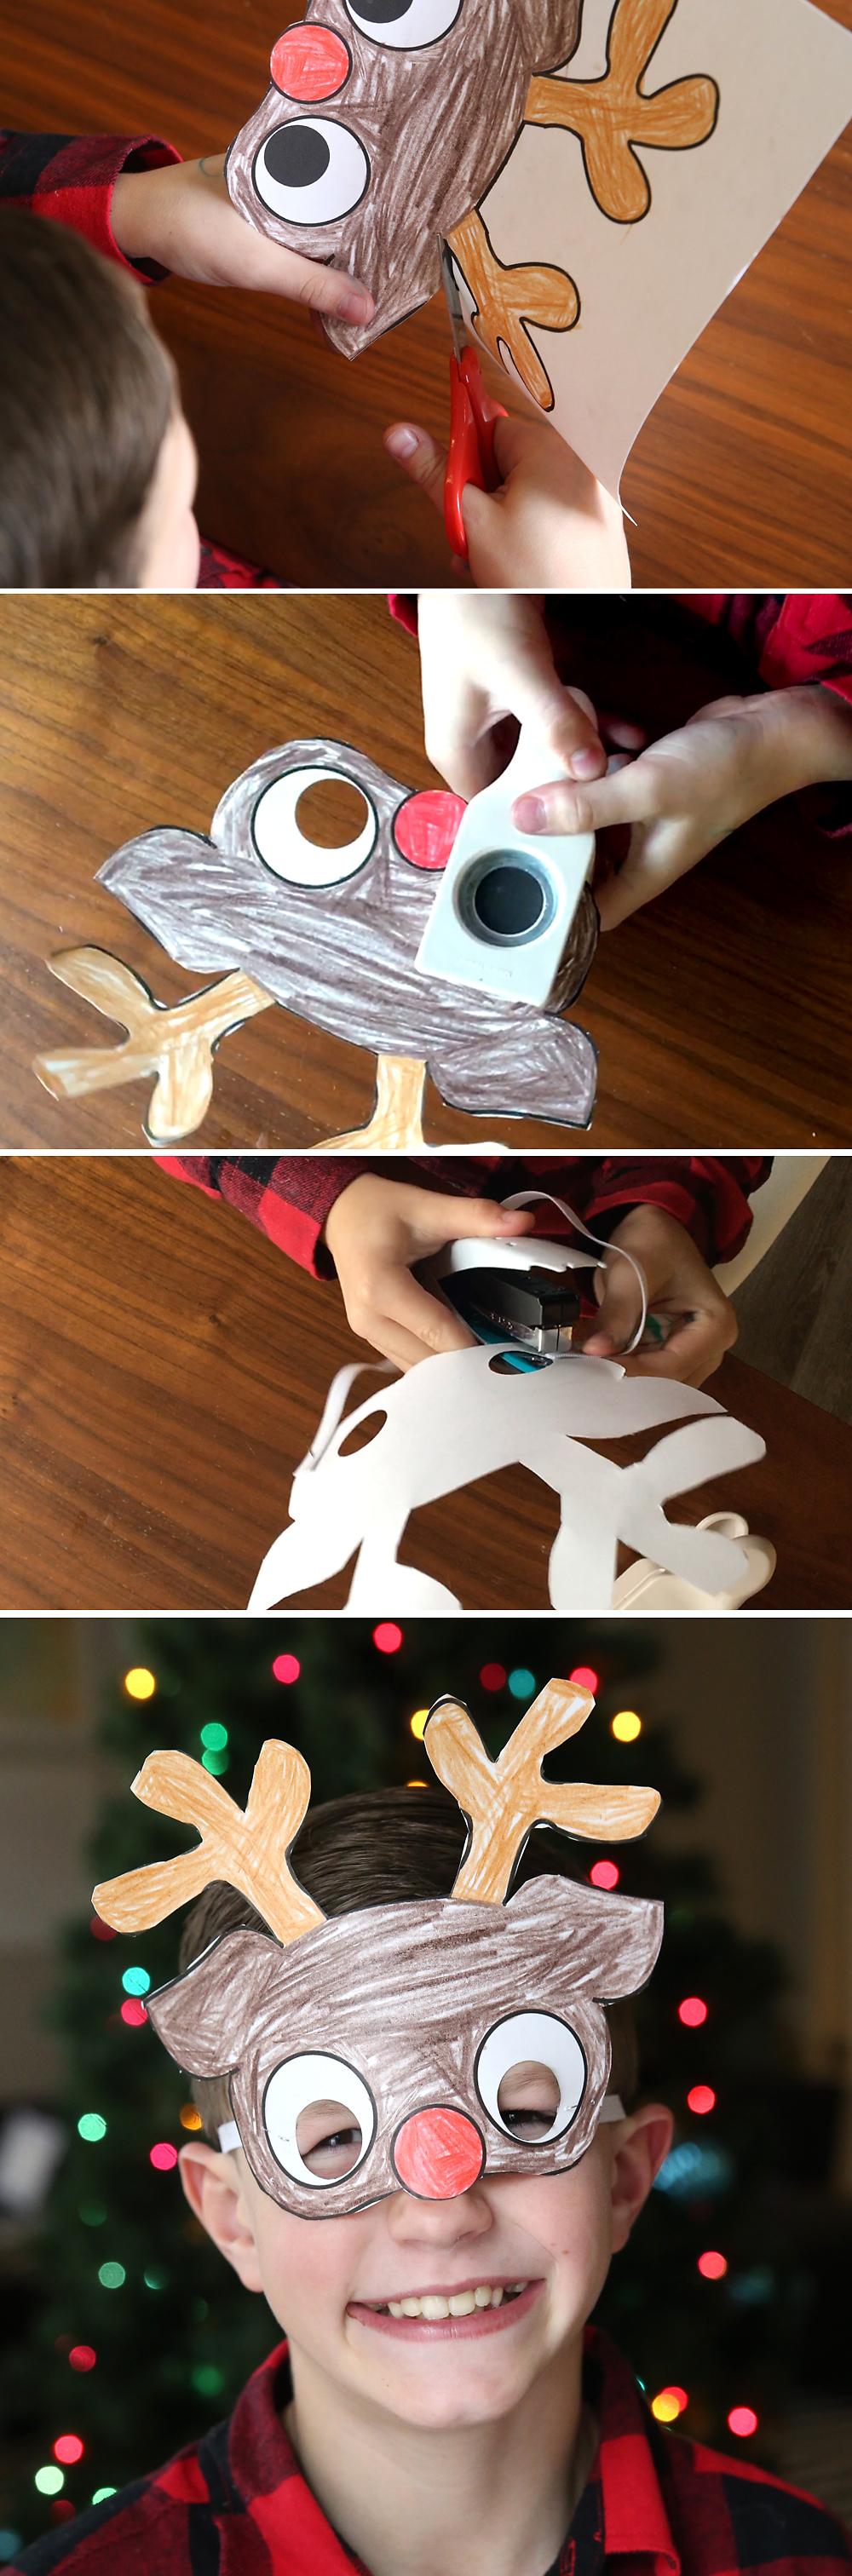 Cutting out reindeer mask, punching out eye holes, stapling on elastic, boy wearing reindeer mask